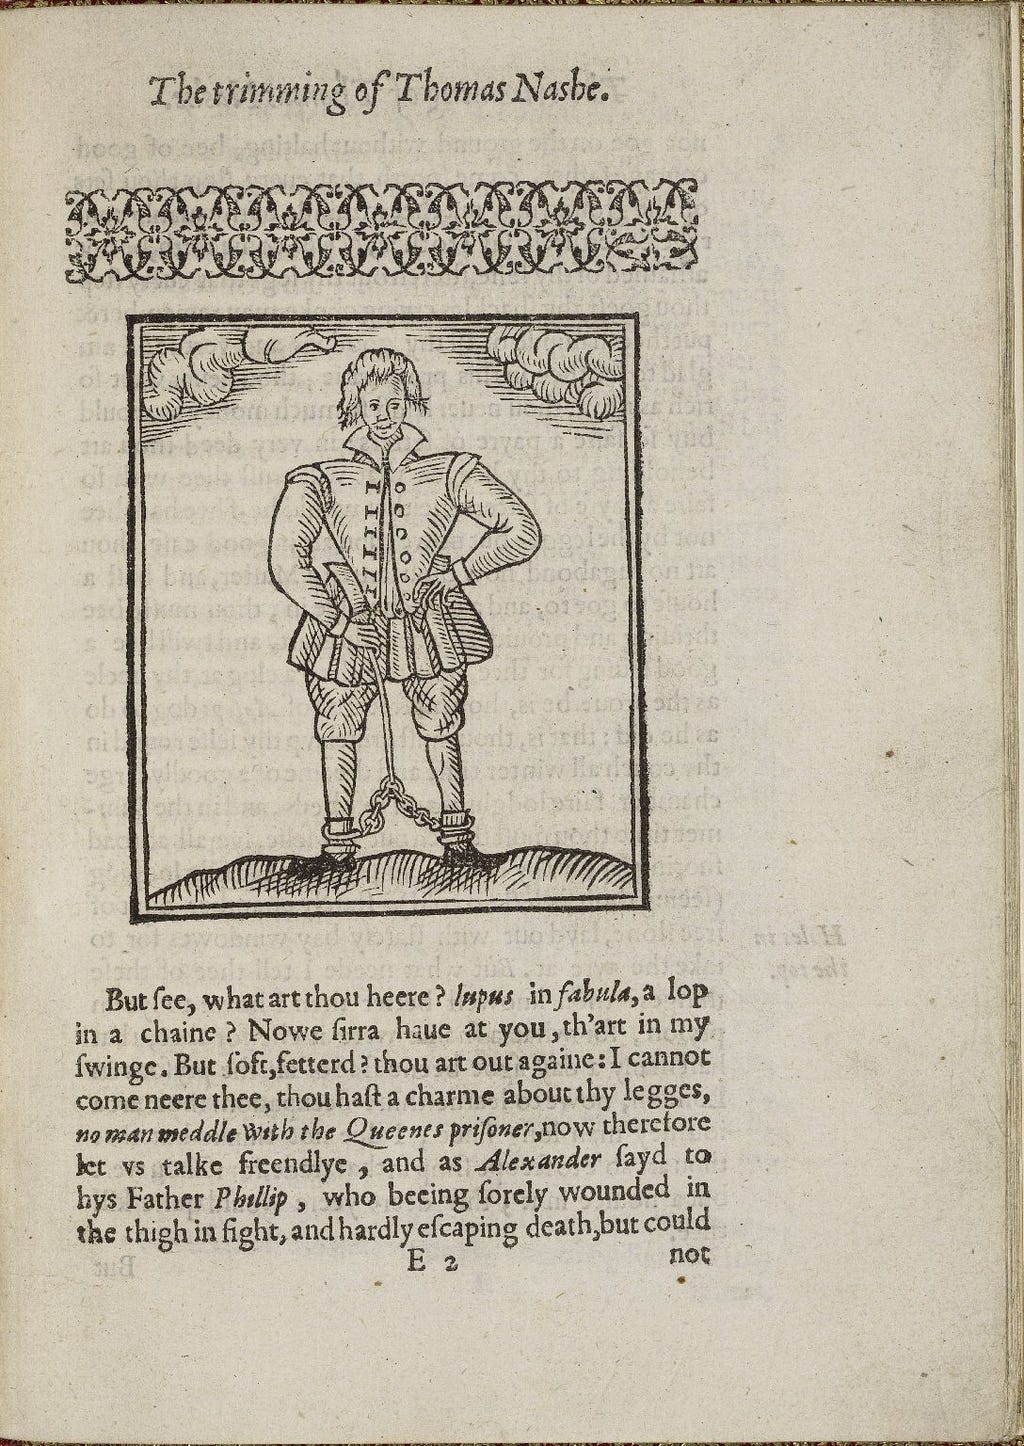 Book open to a page with a woodcut of a man with his legs shackled.